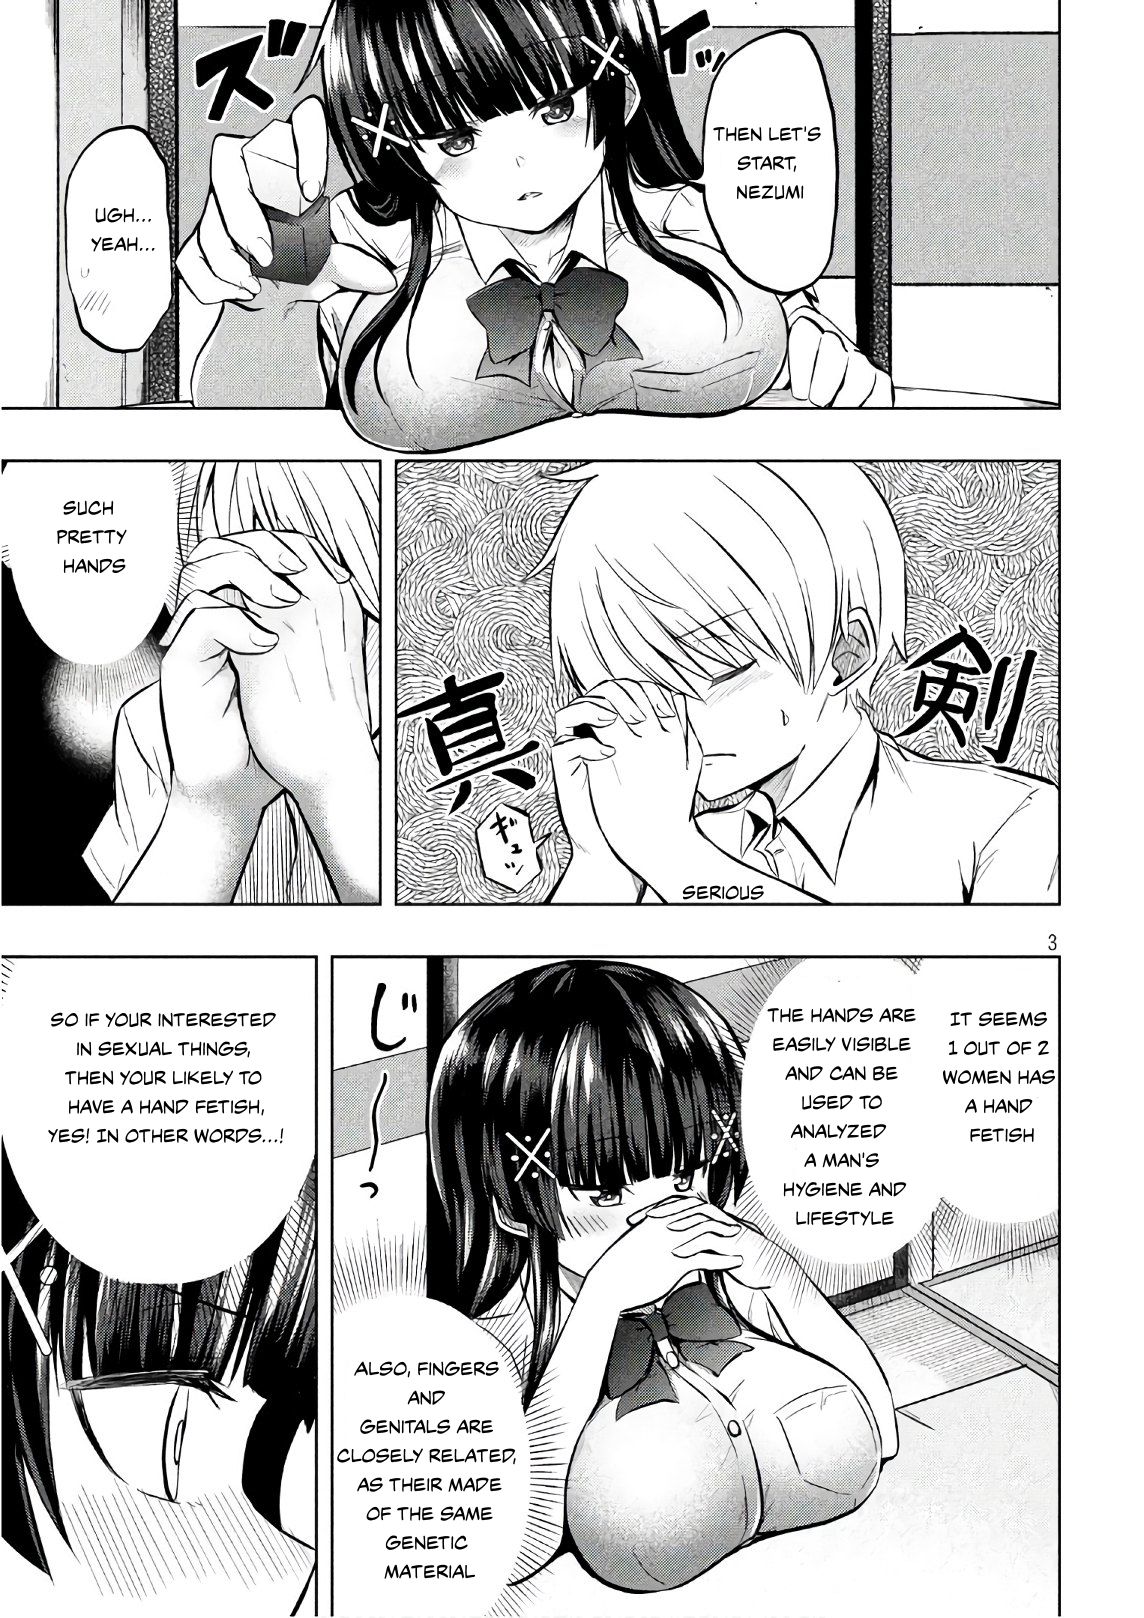 A Girl Who Is Very Well-Informed About Weird Knowledge, Takayukashiki Souko-San - Page 3